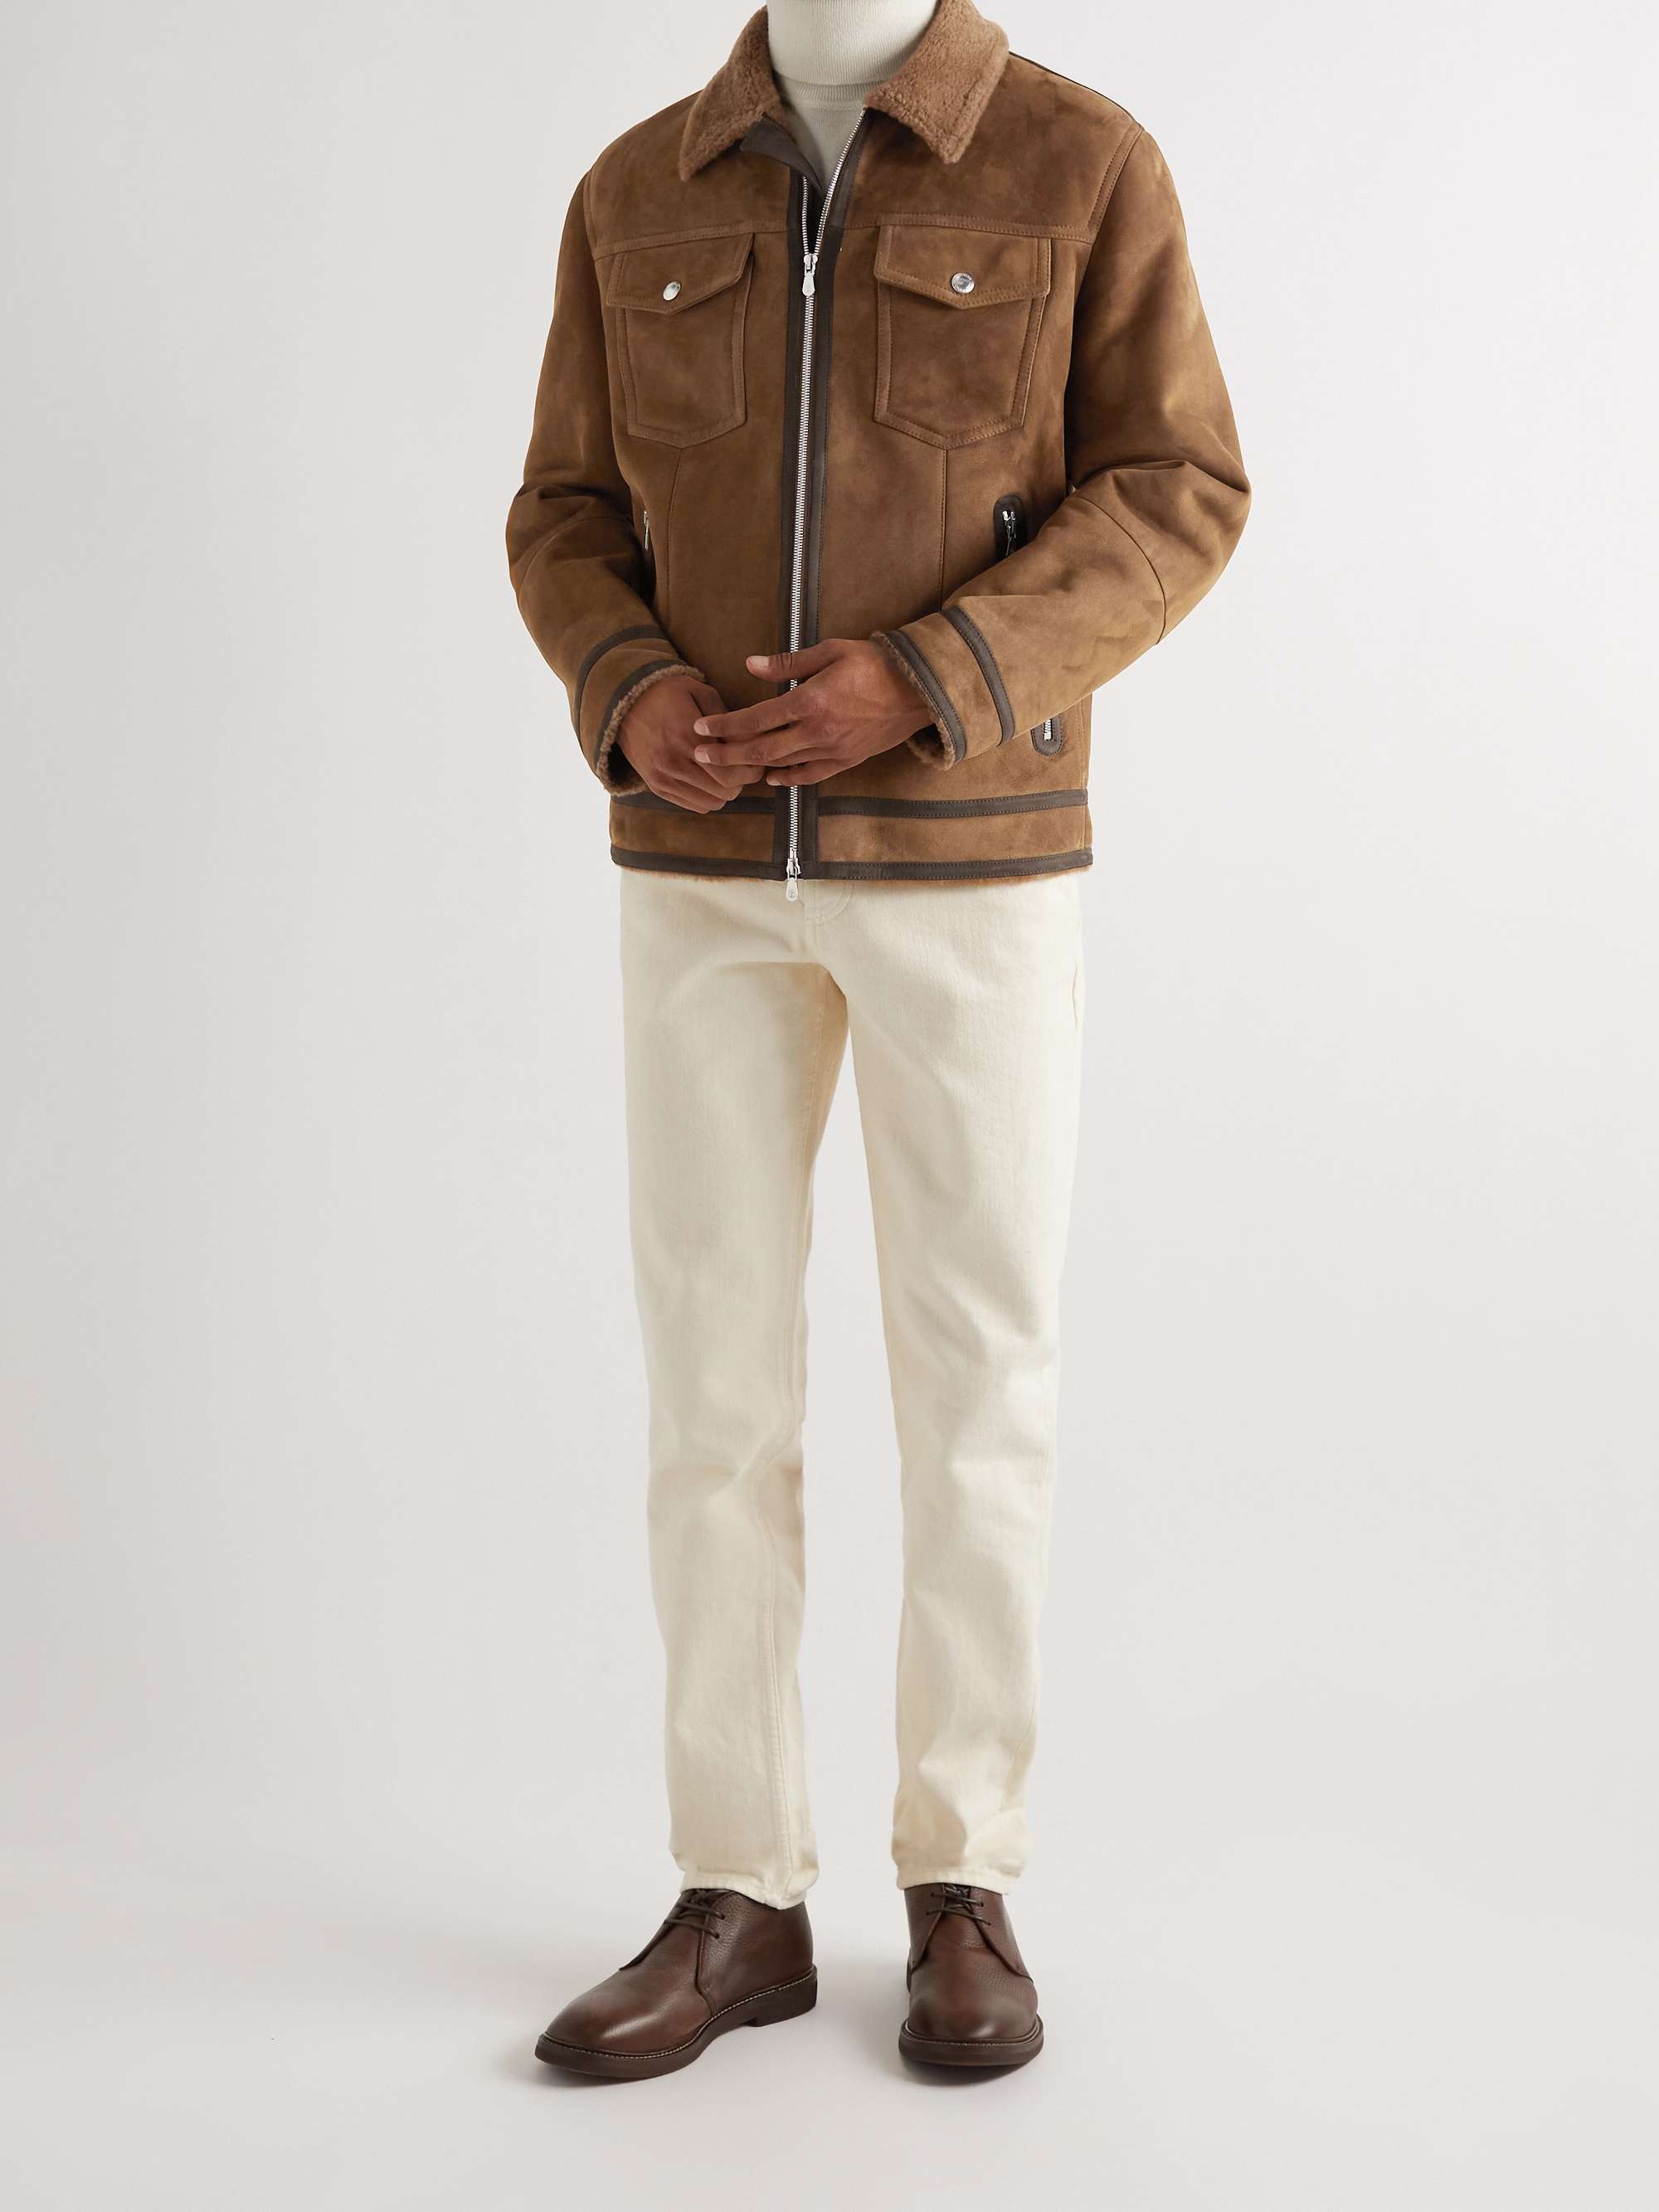 BRUNELLO CUCINELLI Shearling-Lined Suede Jacket